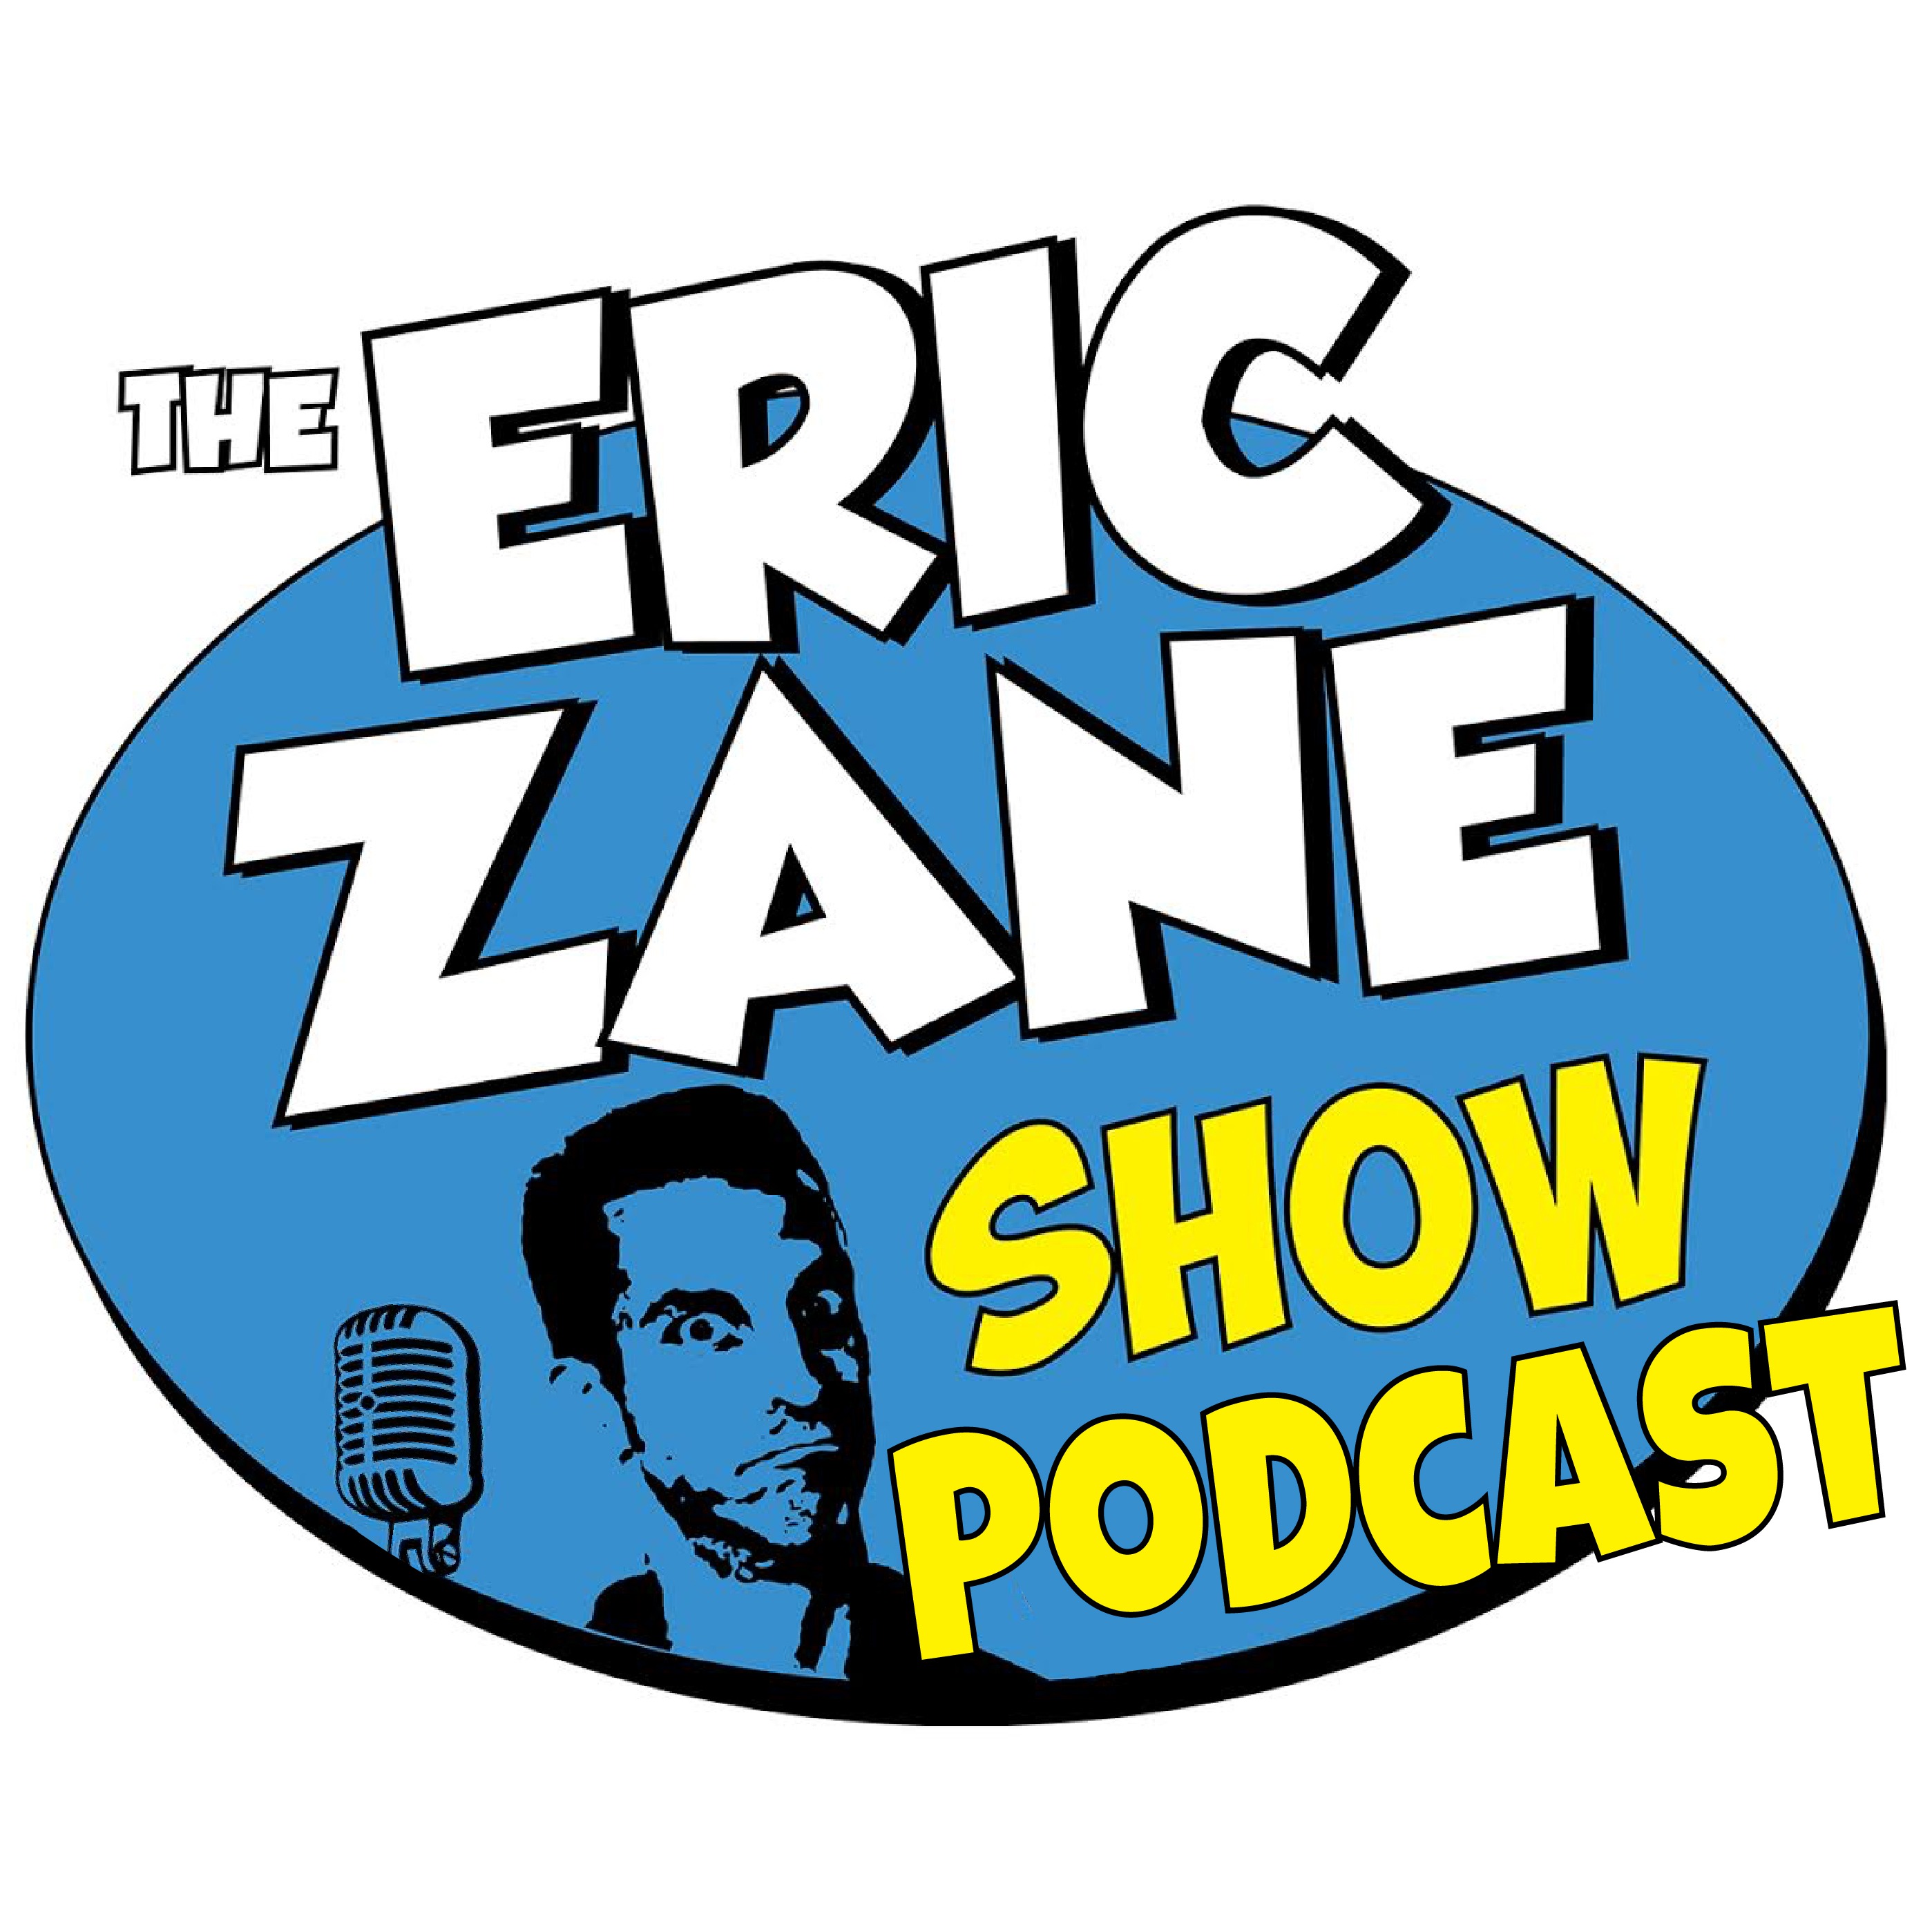 Eric Zane Show Podcast 839 Middle-aged white guys fuck up PRIDE Day